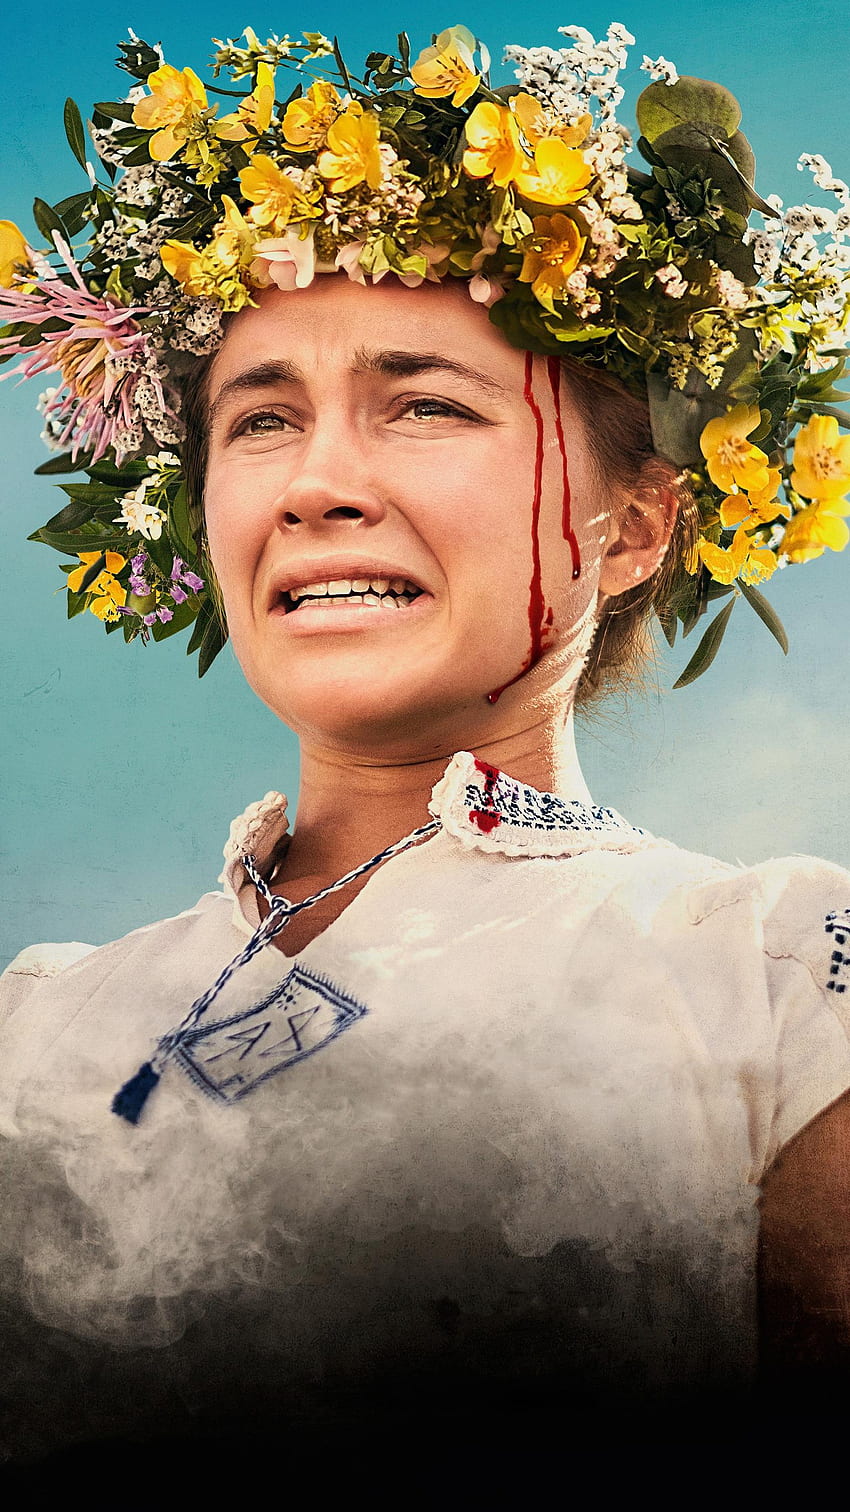 midsommar iPhone Wallpapers Free Download